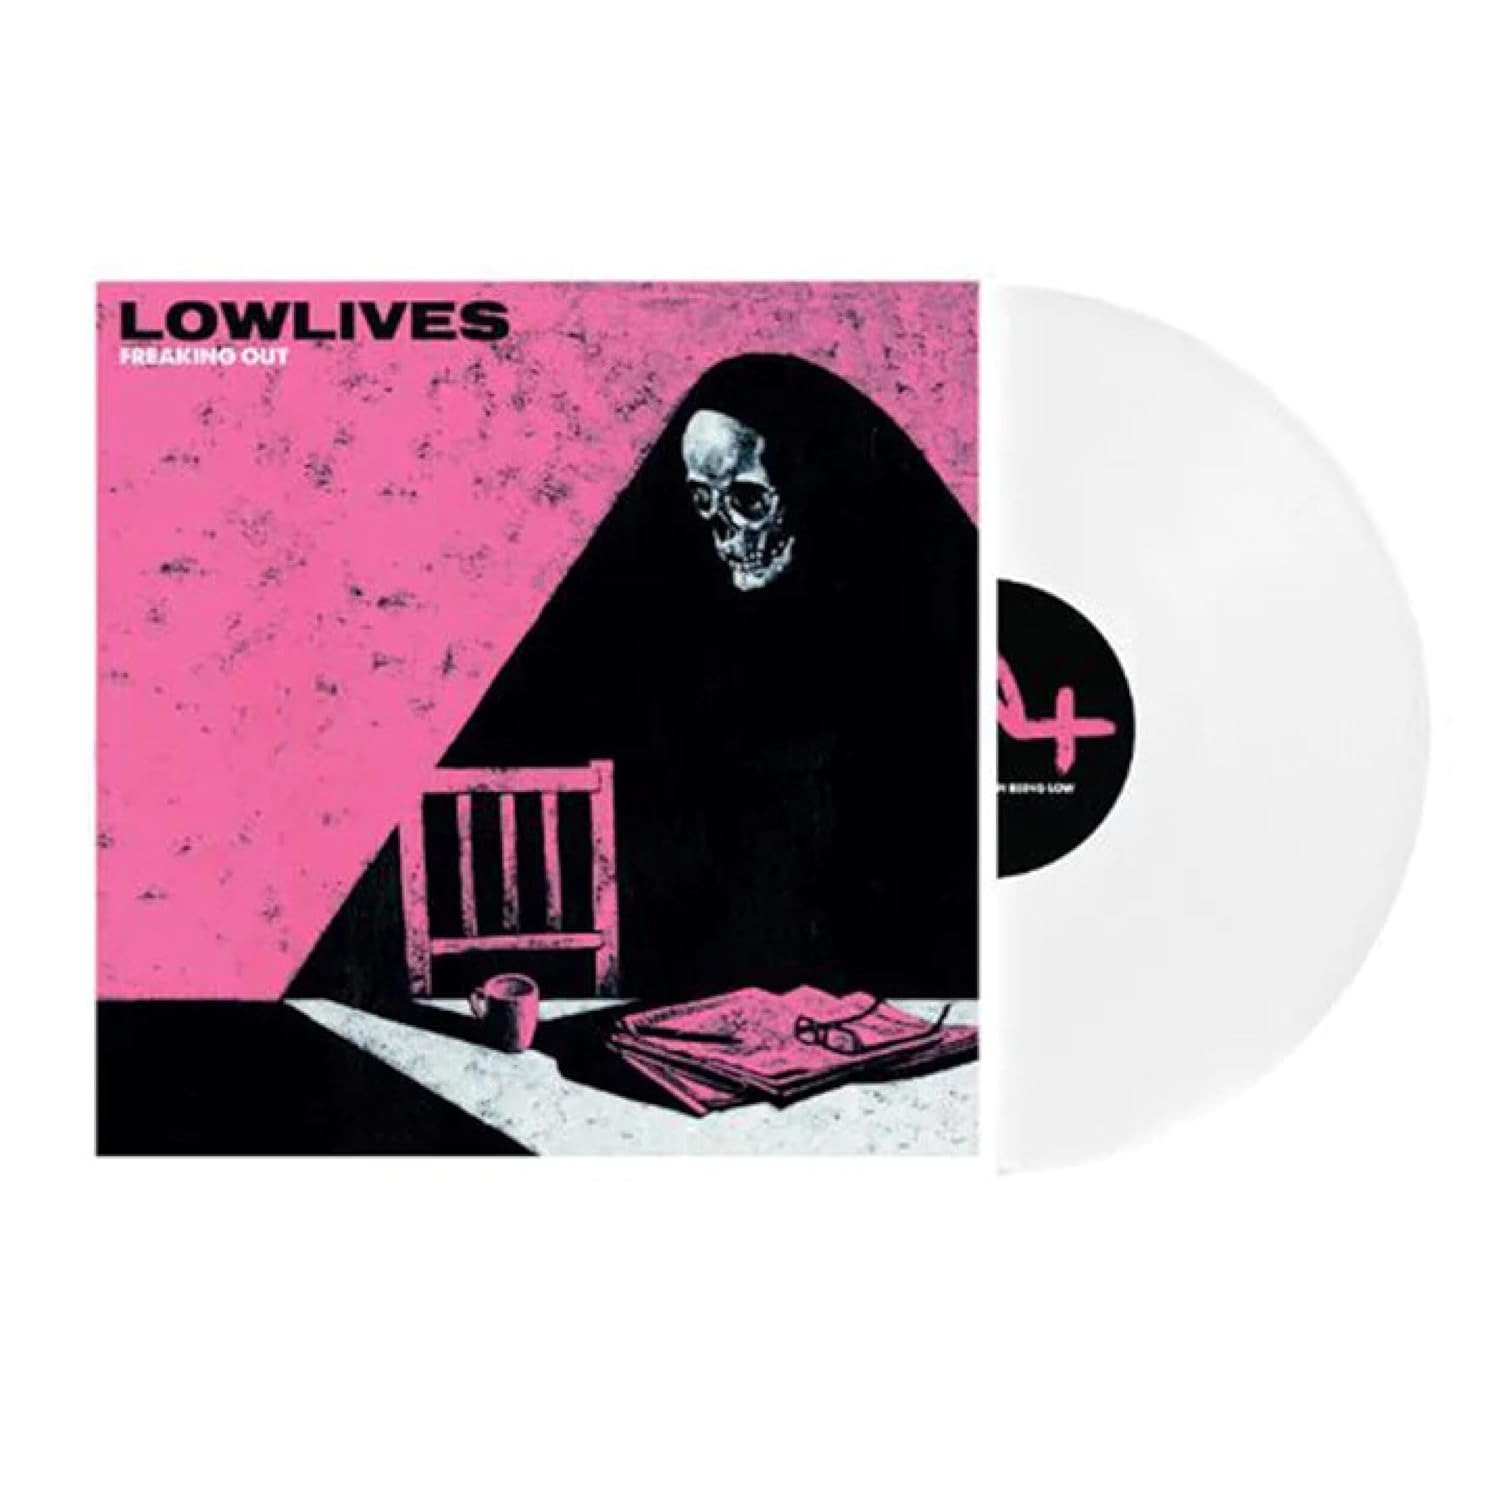 CD Shop - LOWLIVES FREAKING OUT COLORED LTD.